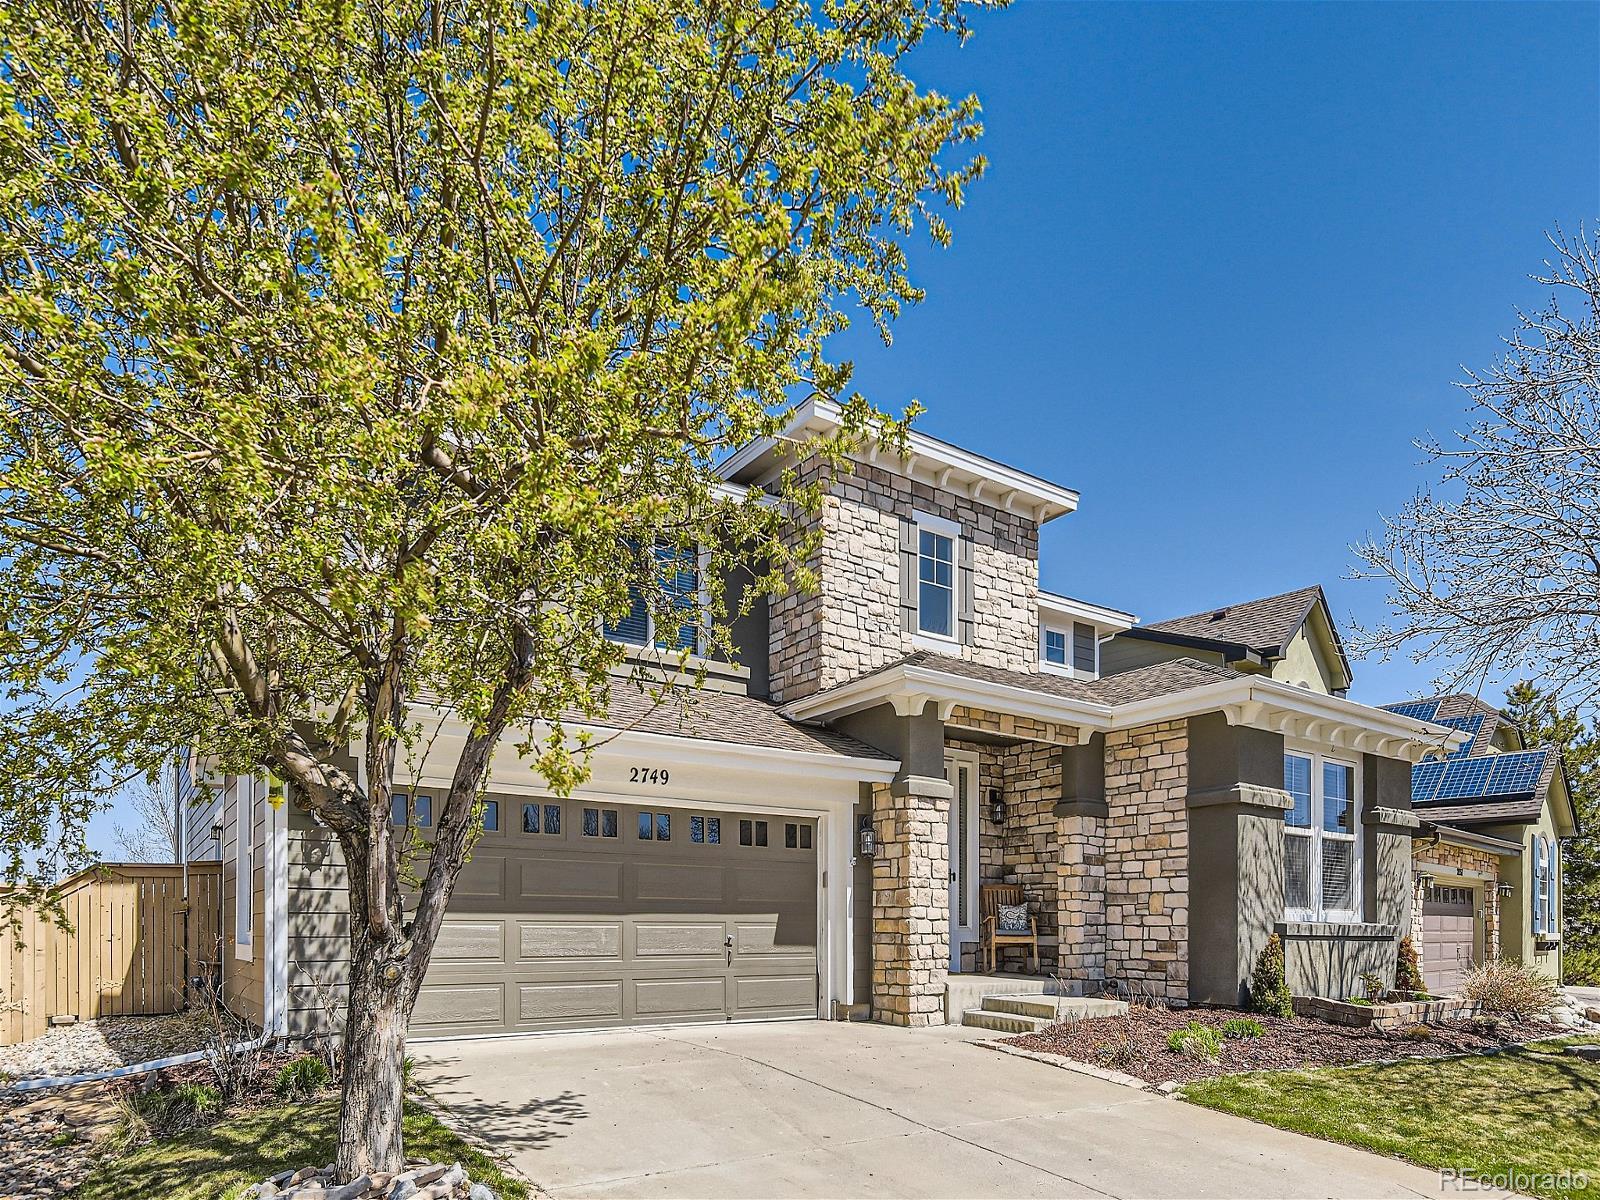 Report Image for 2749  Pemberly Avenue,Highlands Ranch, Colorado